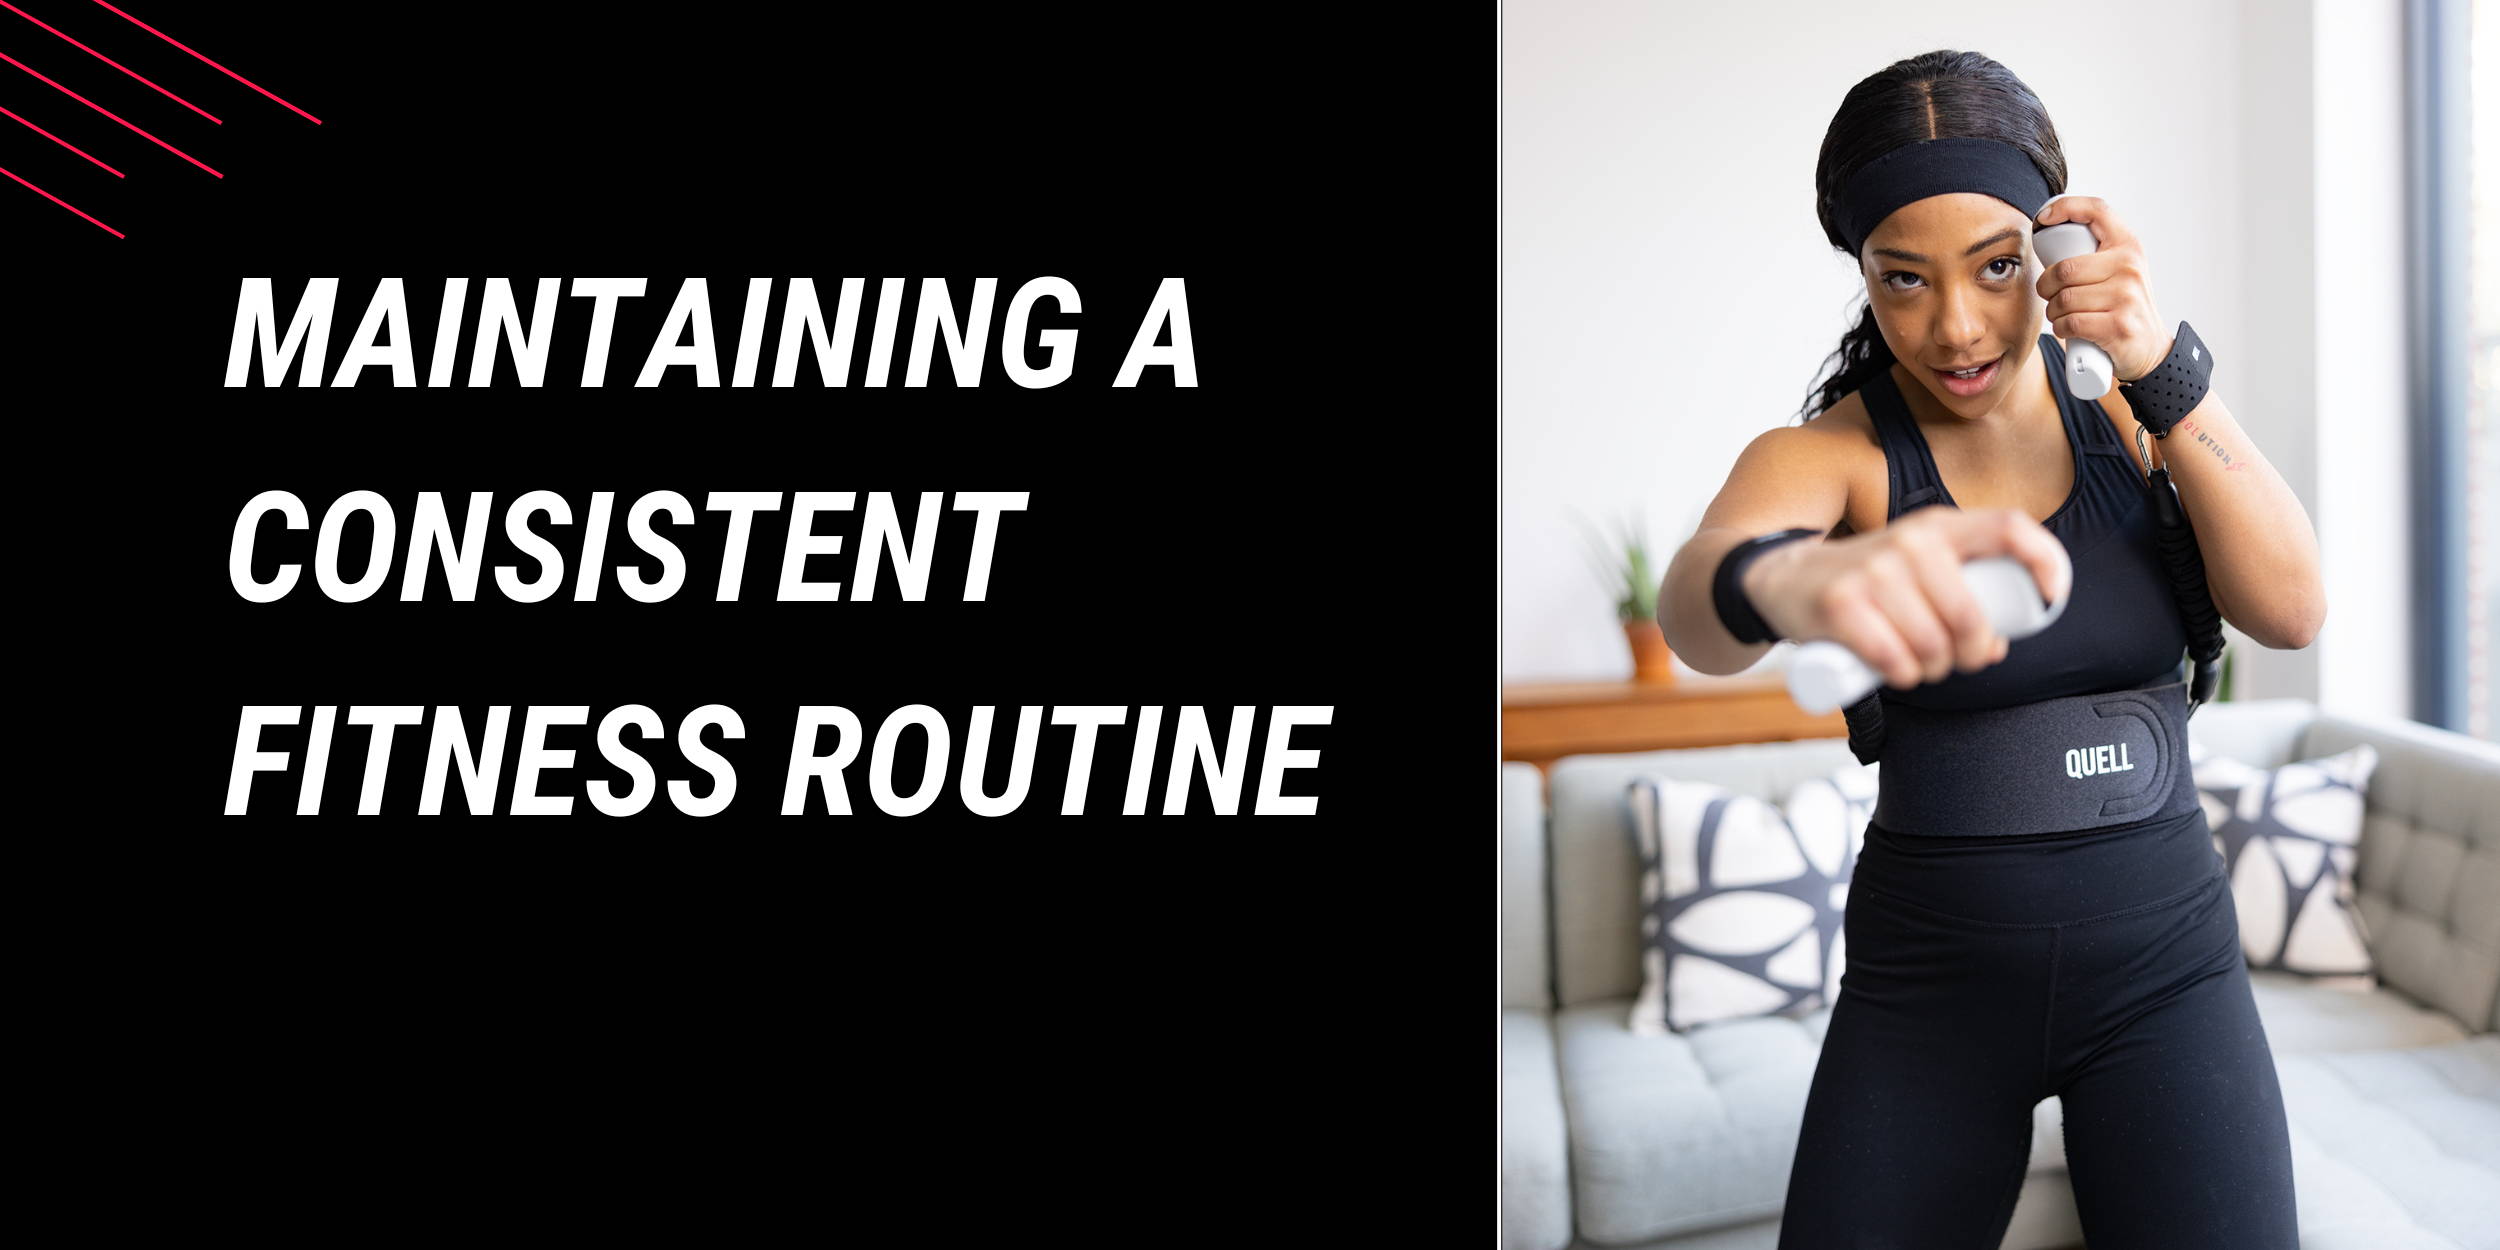 Consistent workout routine